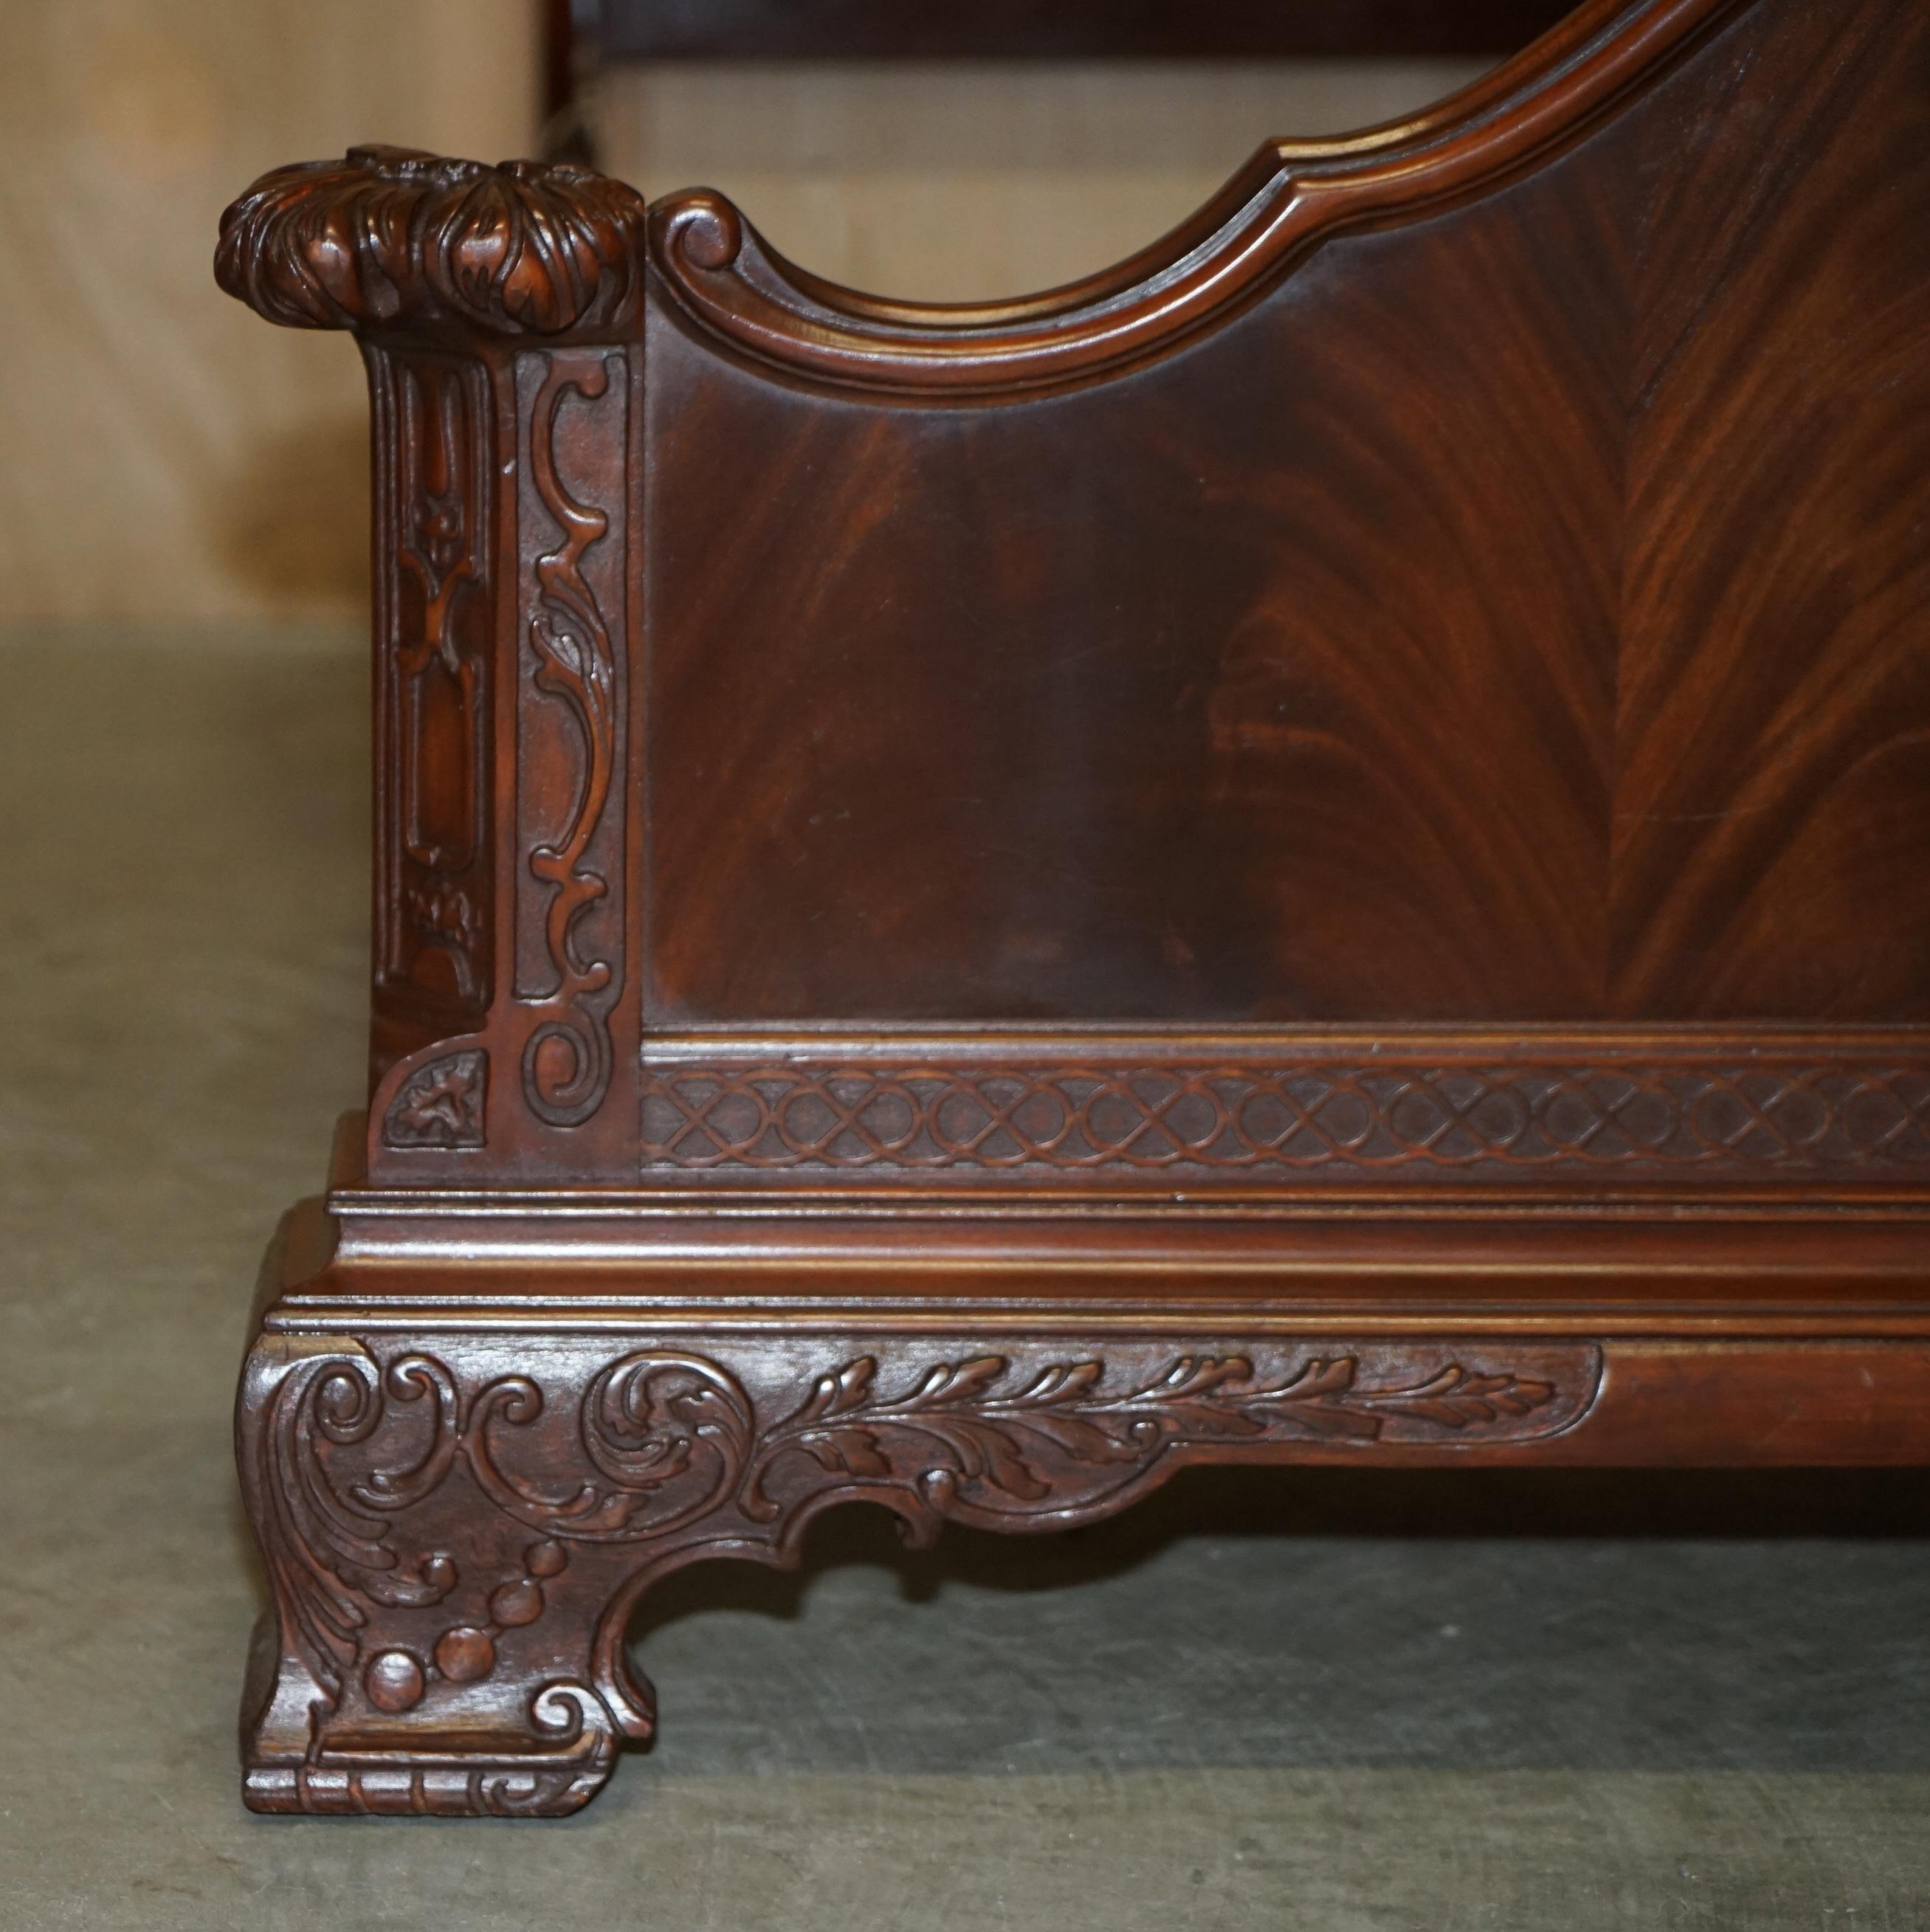 Hardwood EXQUISITELY CARVED ANTIQUE ViCTORIAN CIRCA 1880 FLAMED HARDWOOD DOUBLE BED FRAME For Sale